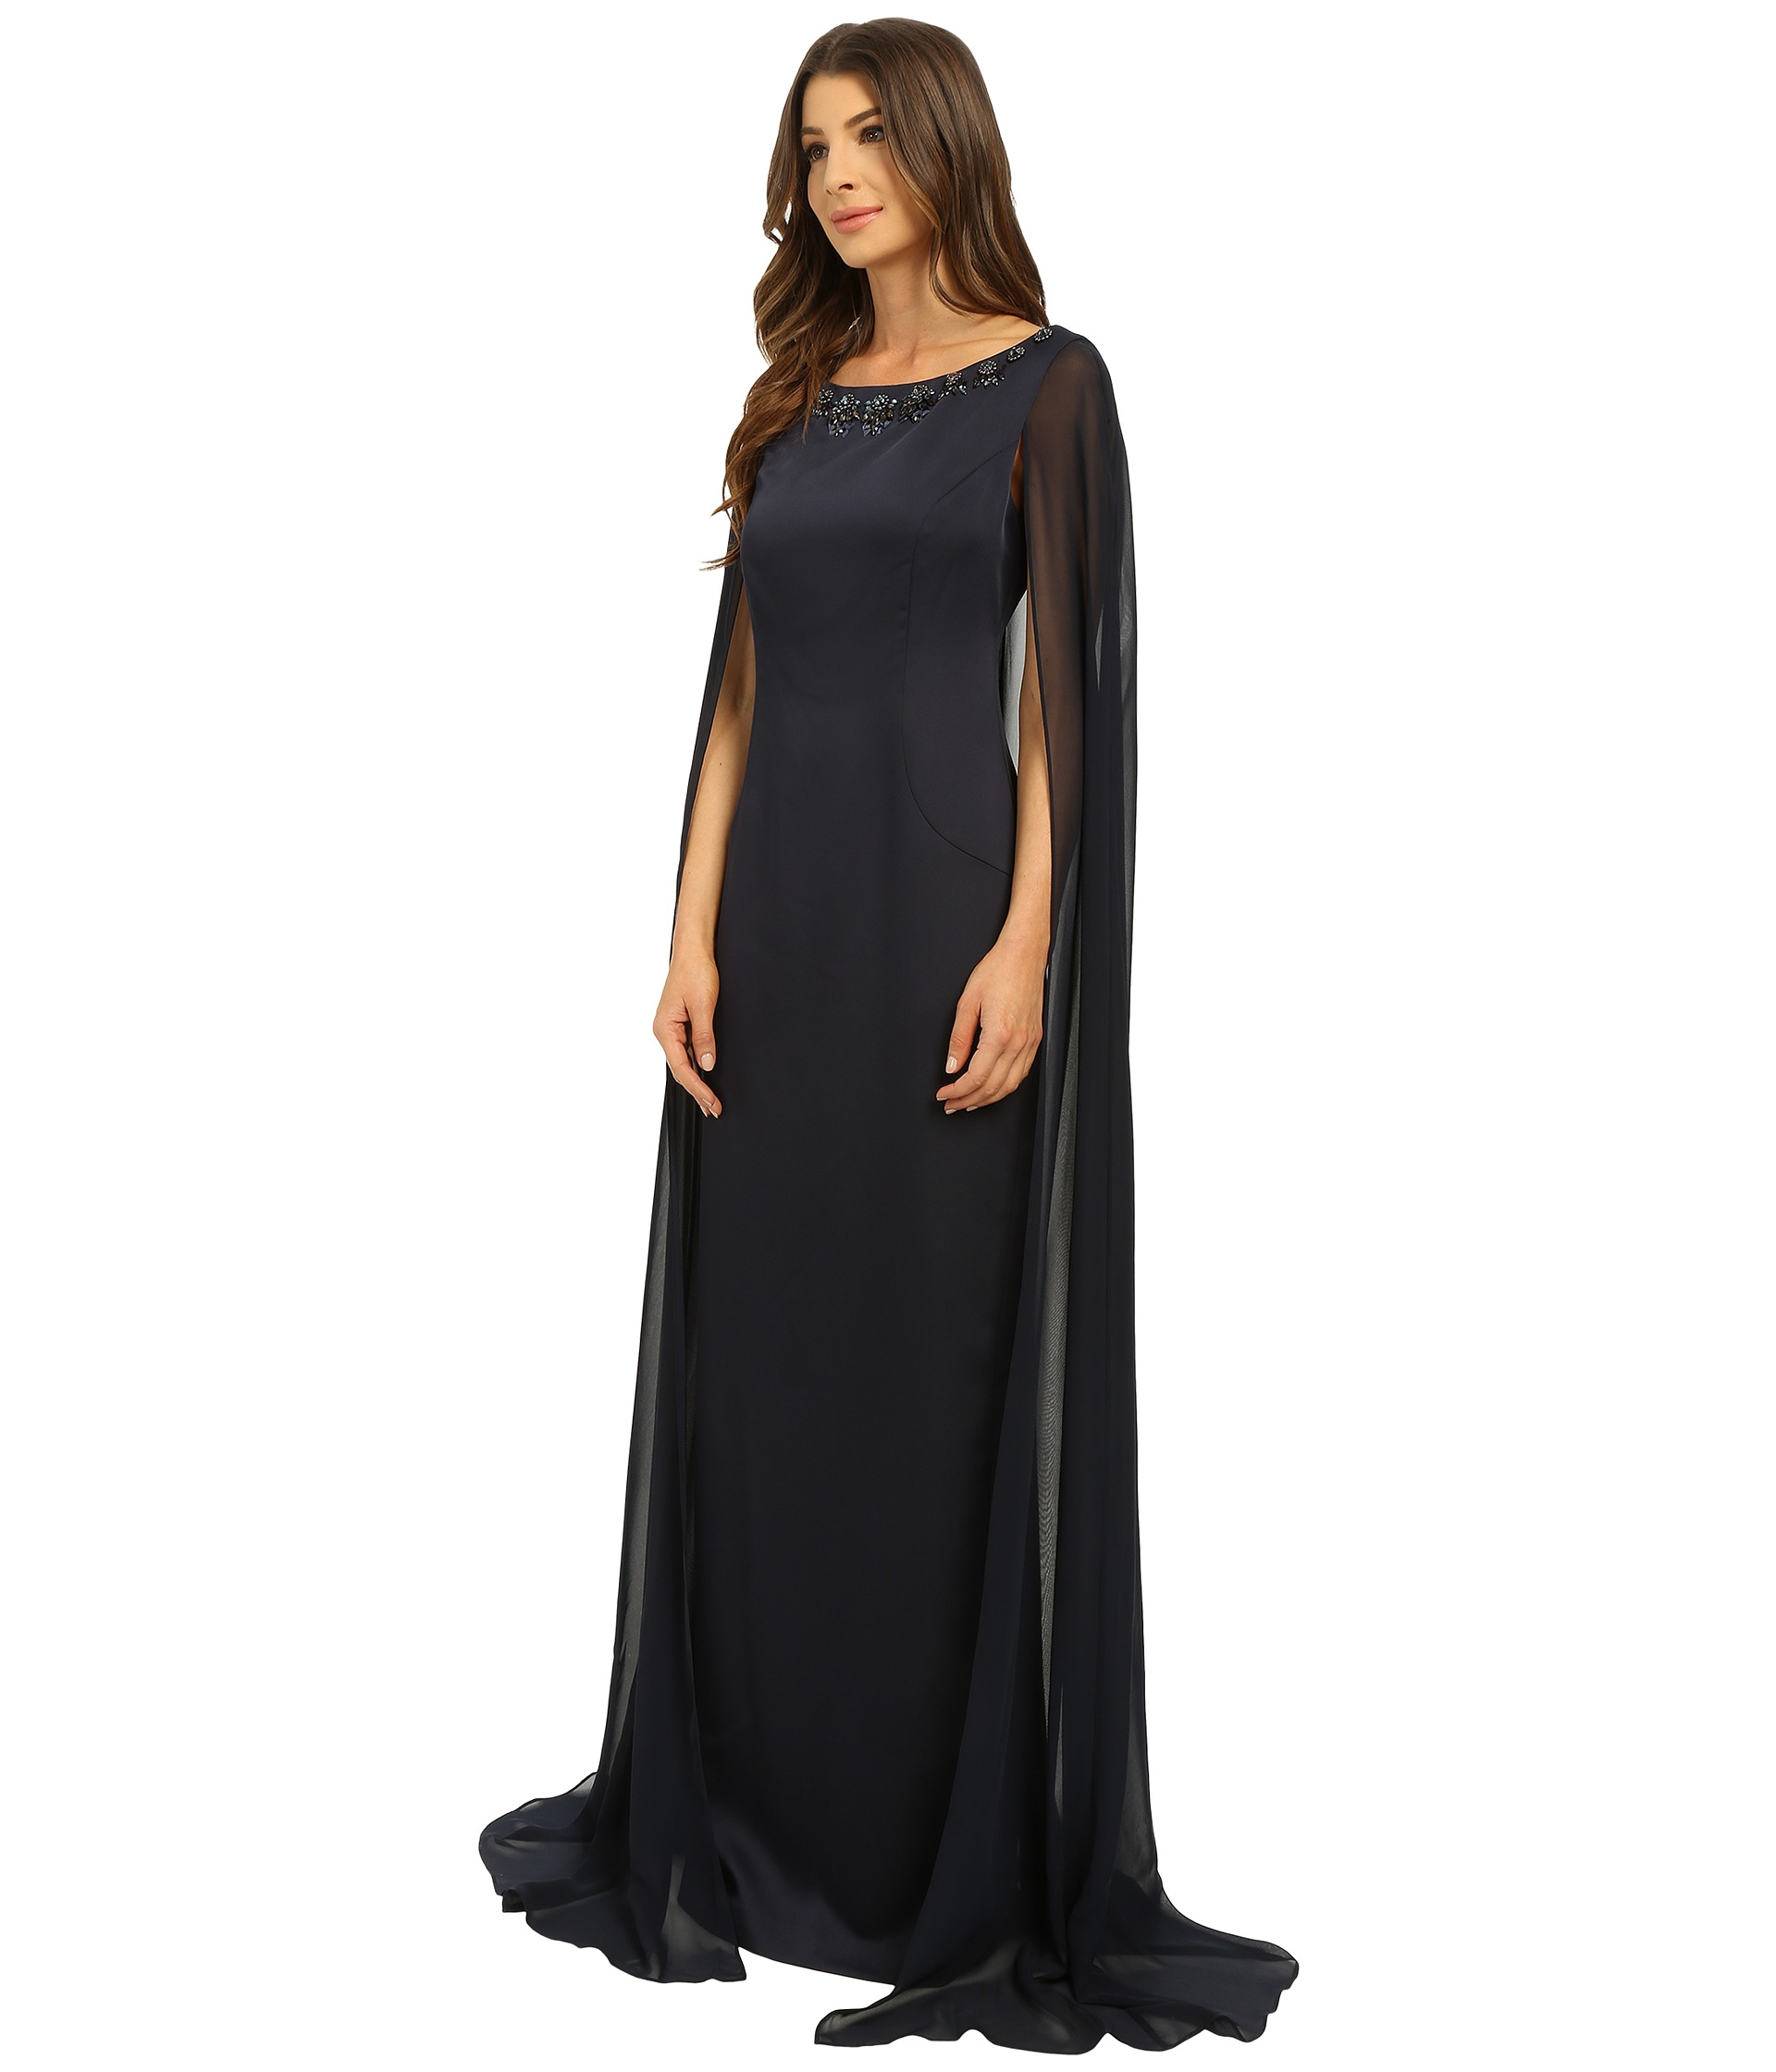 Adrianna Papell Satin Cape Dress With Neck Beading in Black - Lyst